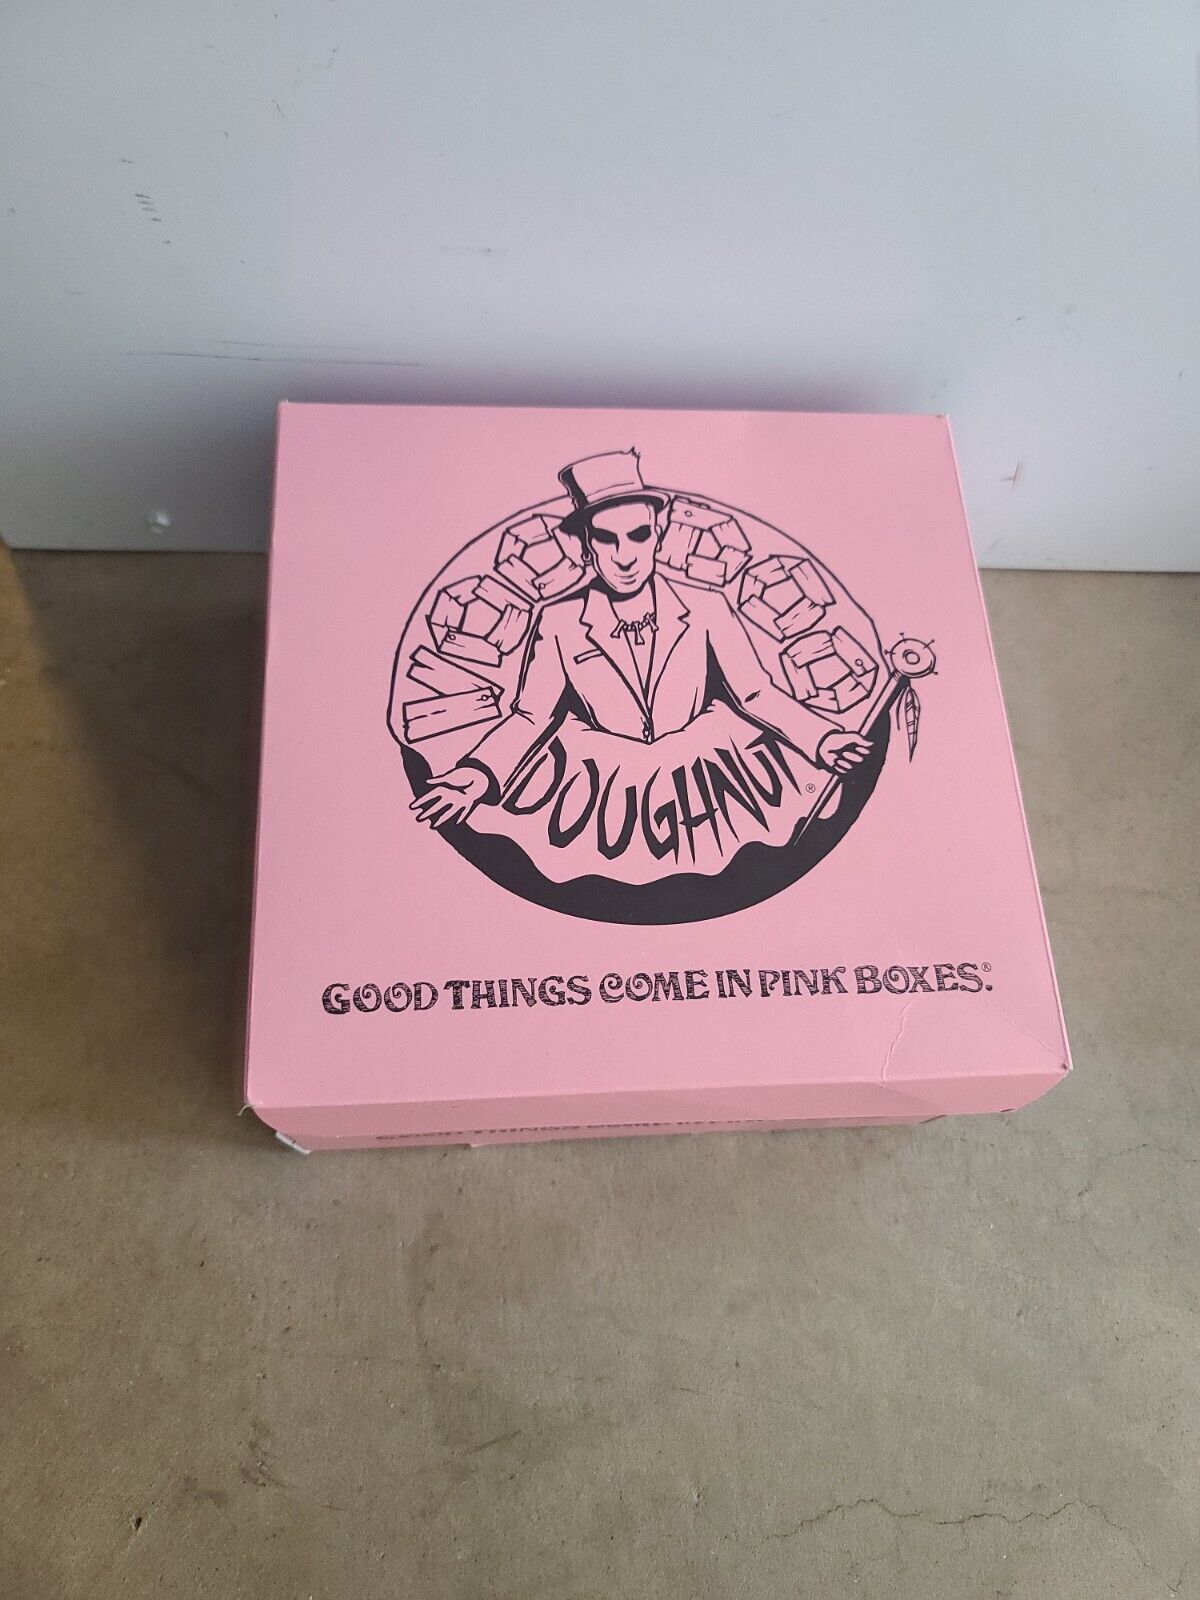 Voodoo Doughnut Good things come in pink boxes Donut euphemism 9x9x5 inches